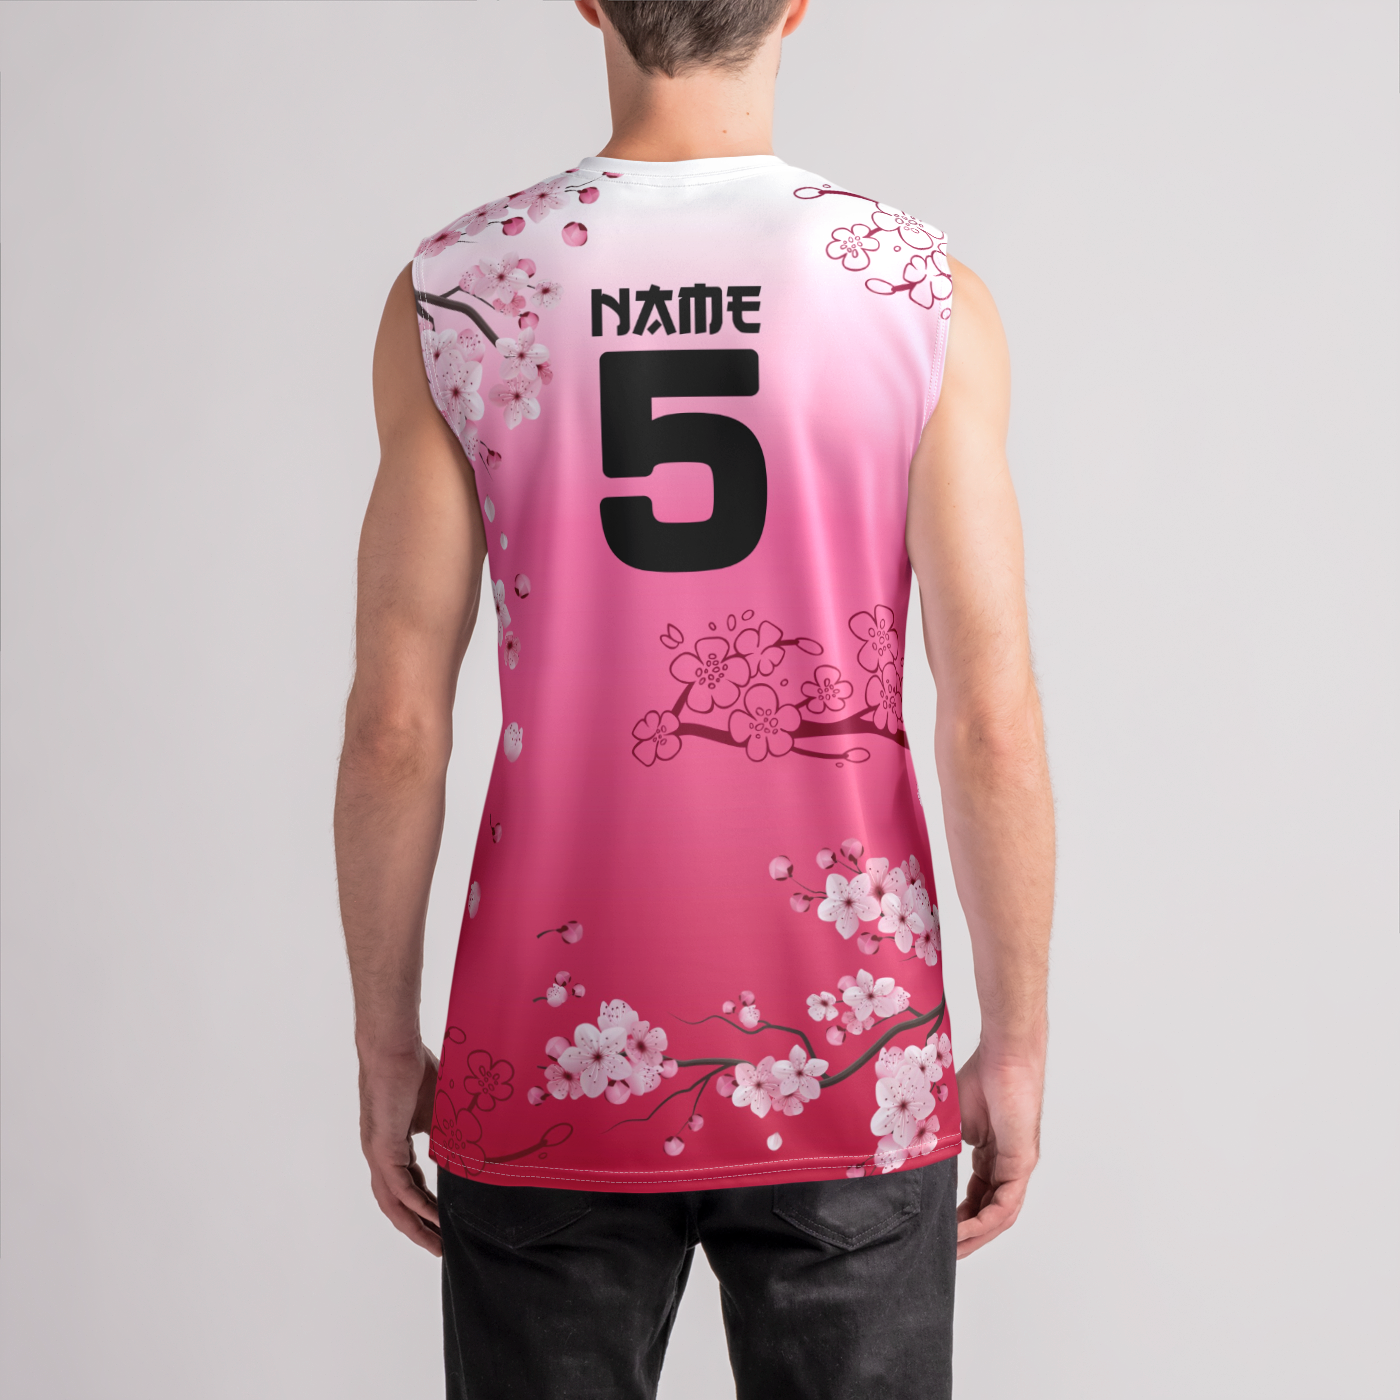 A2 14 Red Cherry Blossom Jersey